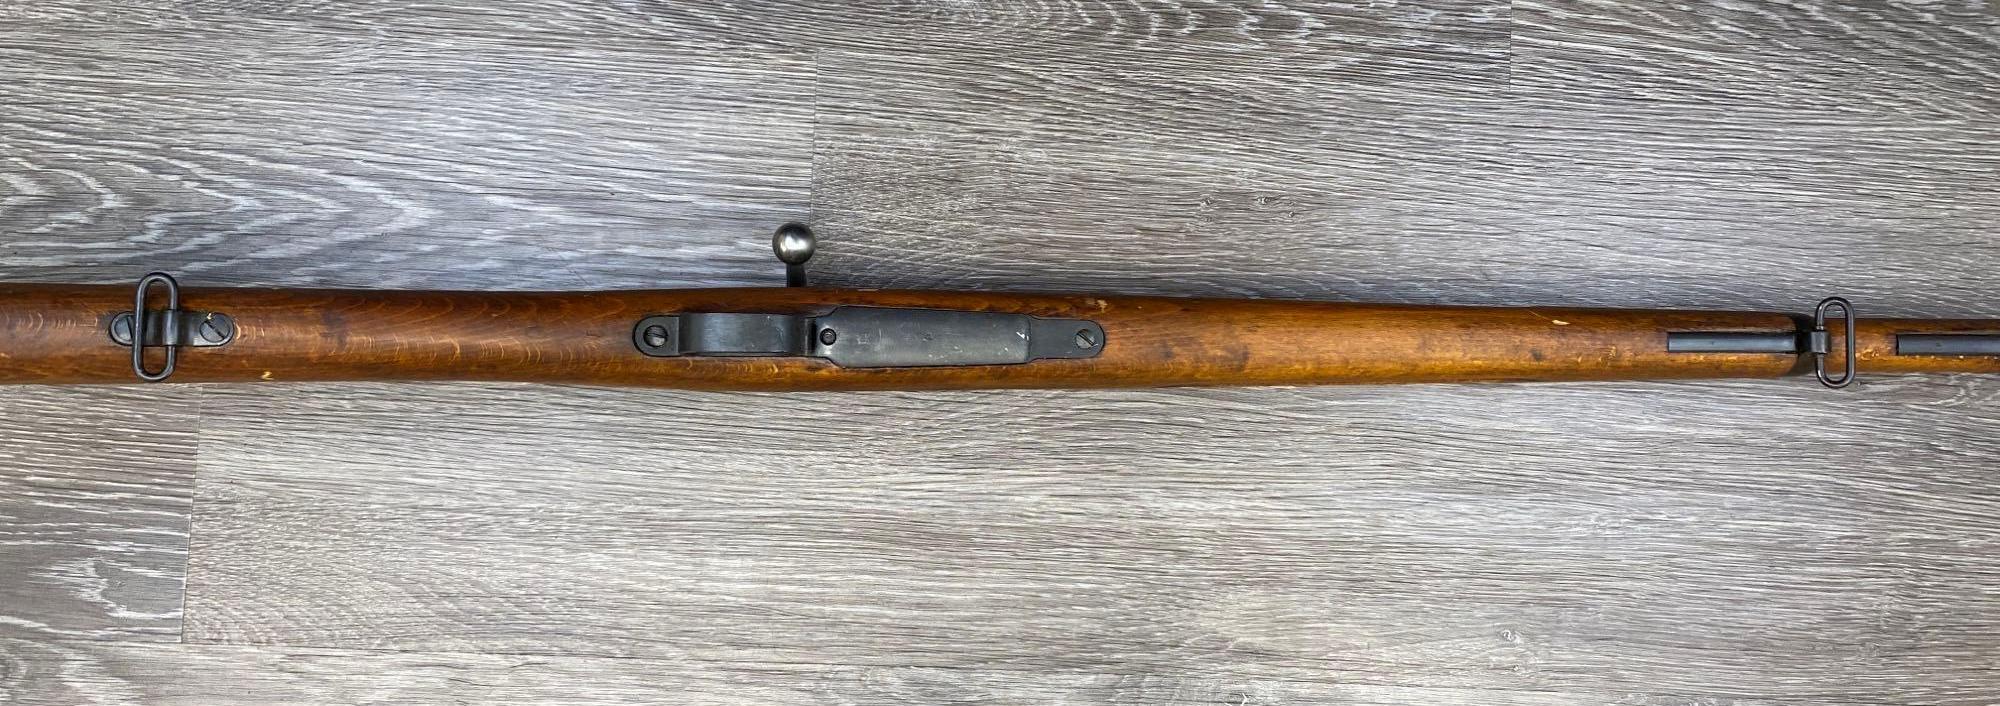 M38 SWEDISH MAUSER 6.5x55mm CAL. by HUSQVARNA and WWII DATED 1943